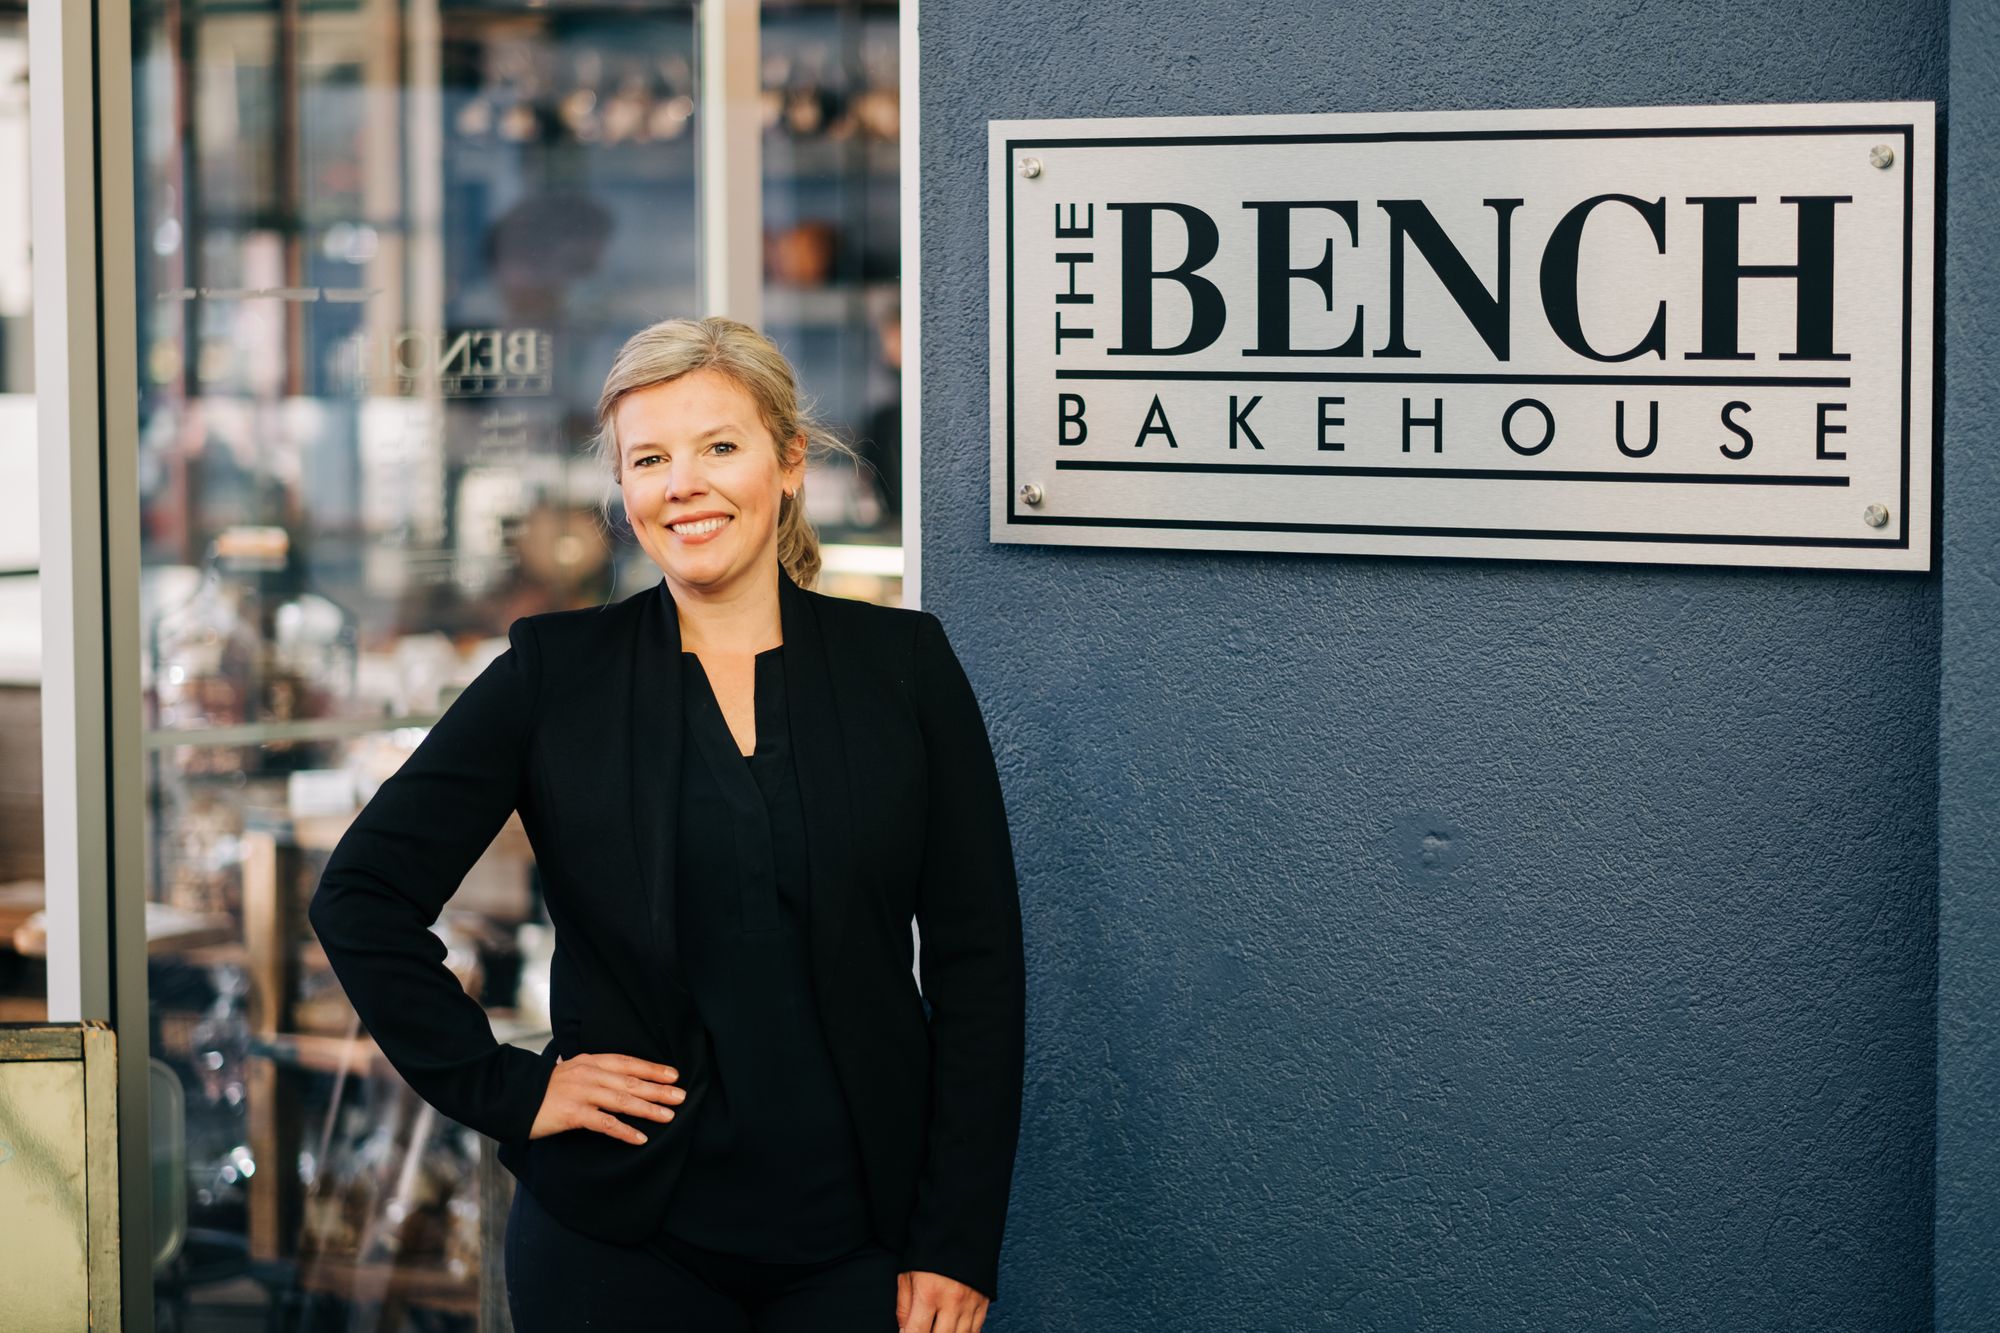 Simple, Natural, Delicious - The Bench Bakehouse